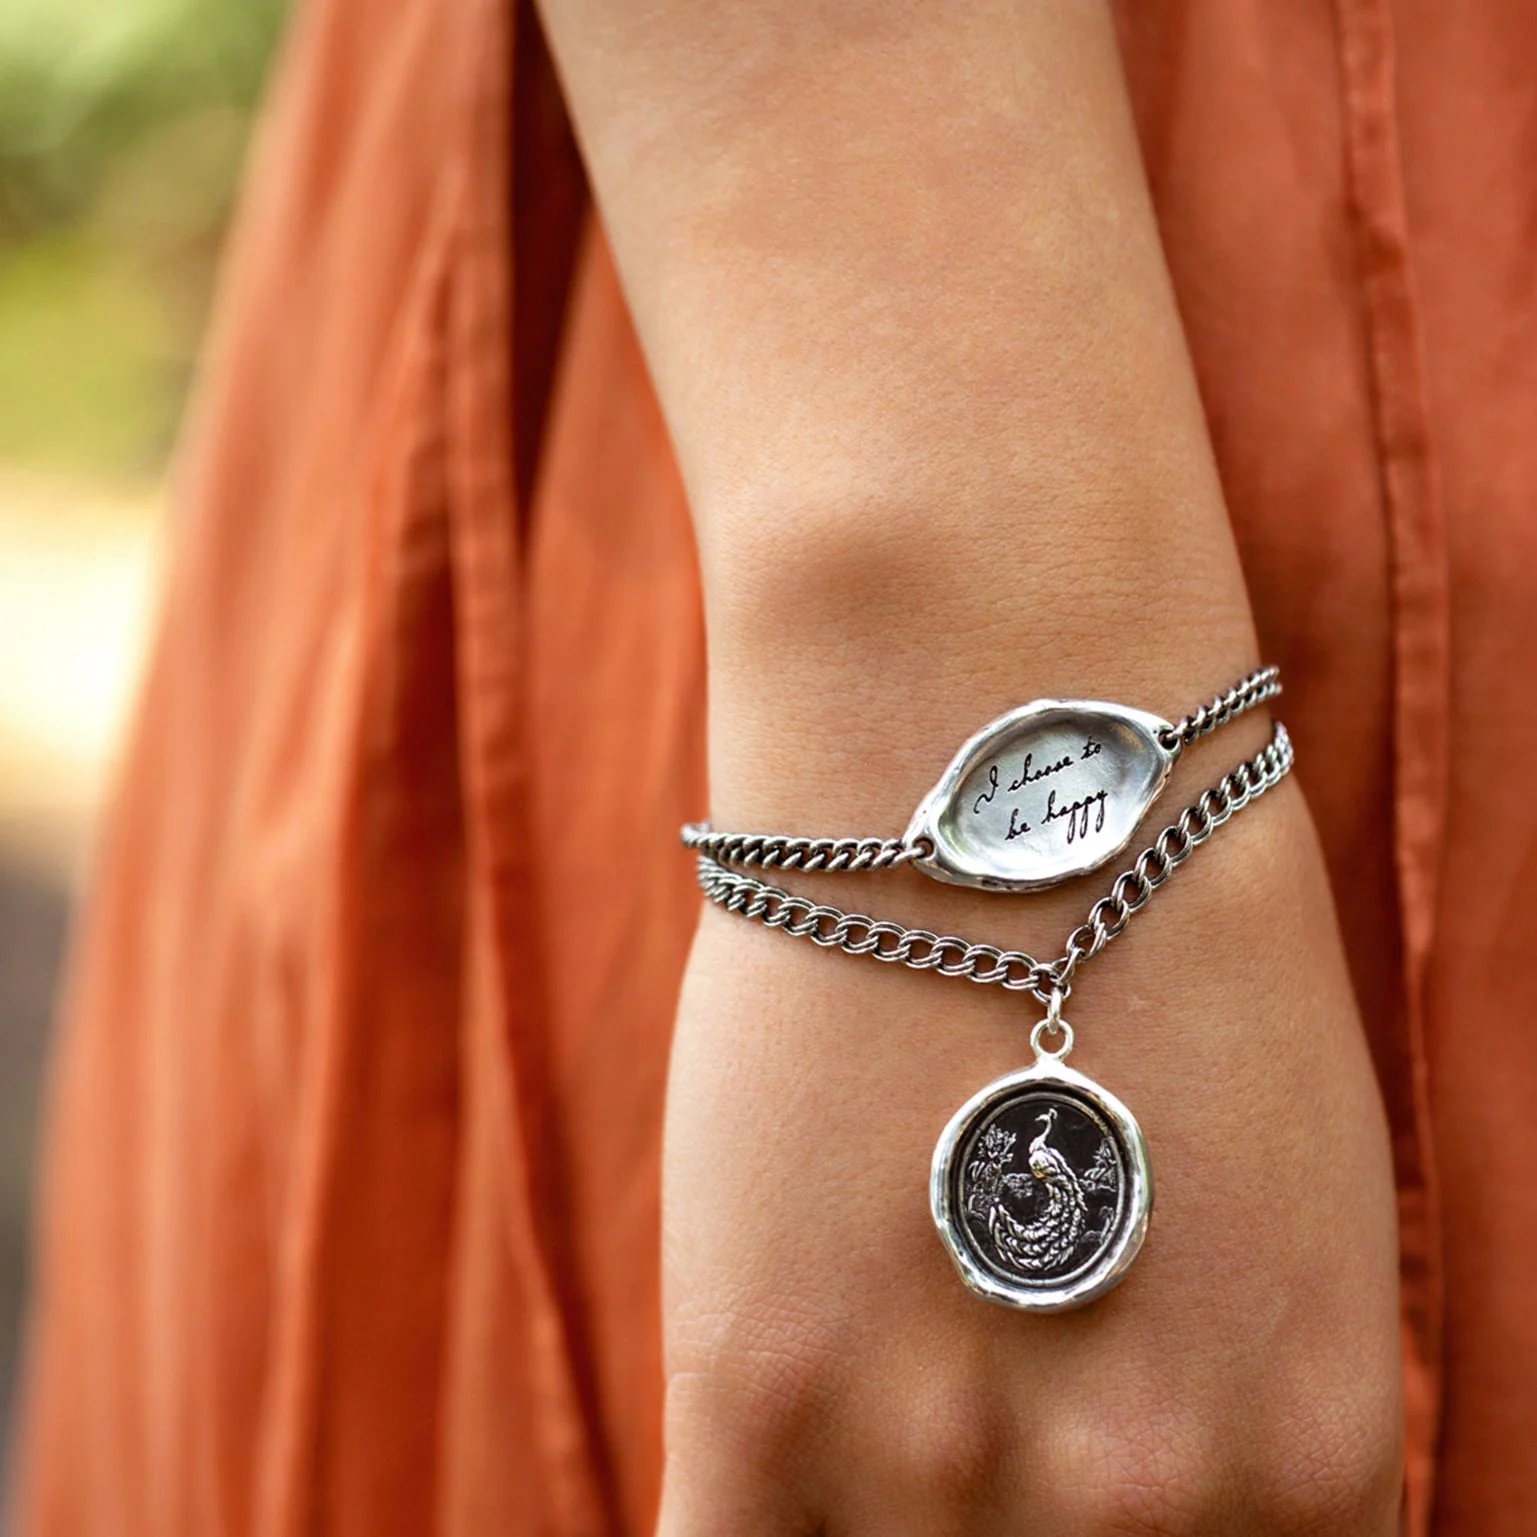 I Am Capable Of Change Affirmation Talisman Chain Bracelet | Magpie Jewellery